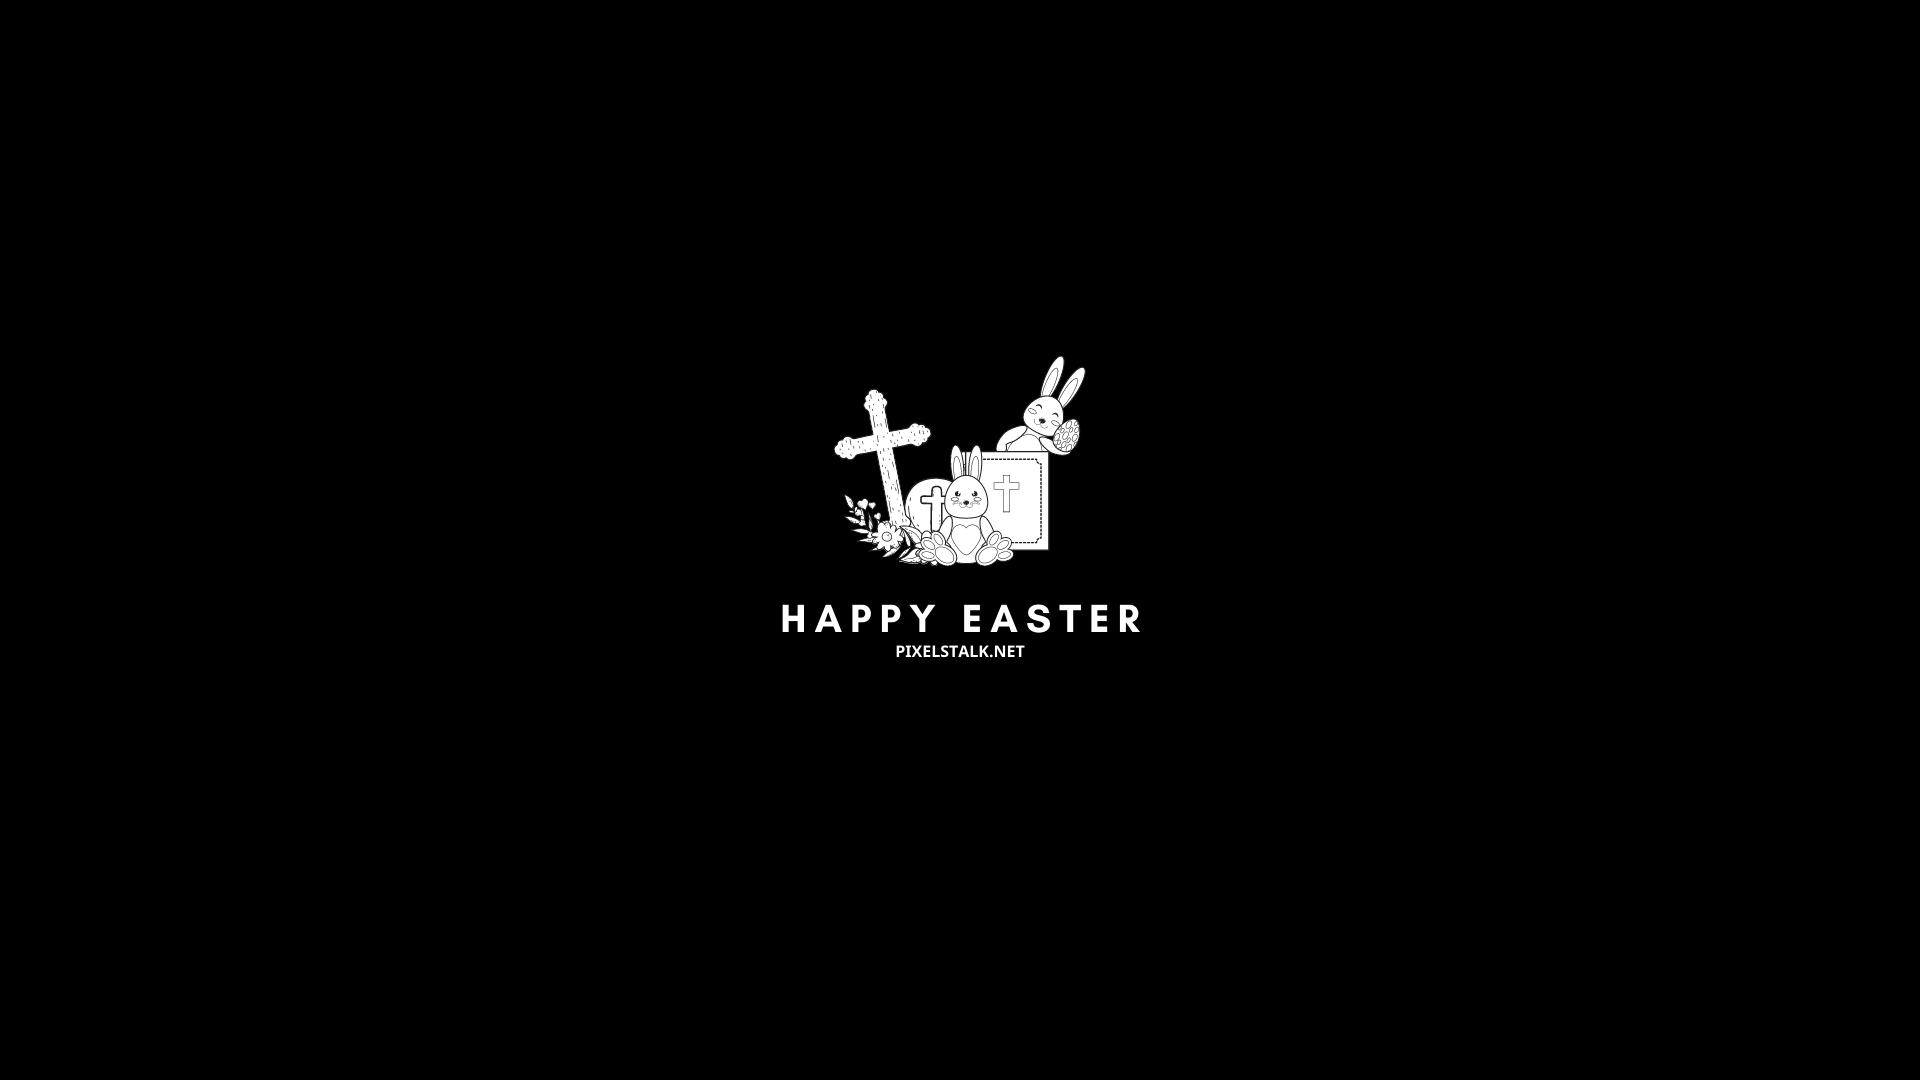 Christian Easter Wallpaper HD Free download